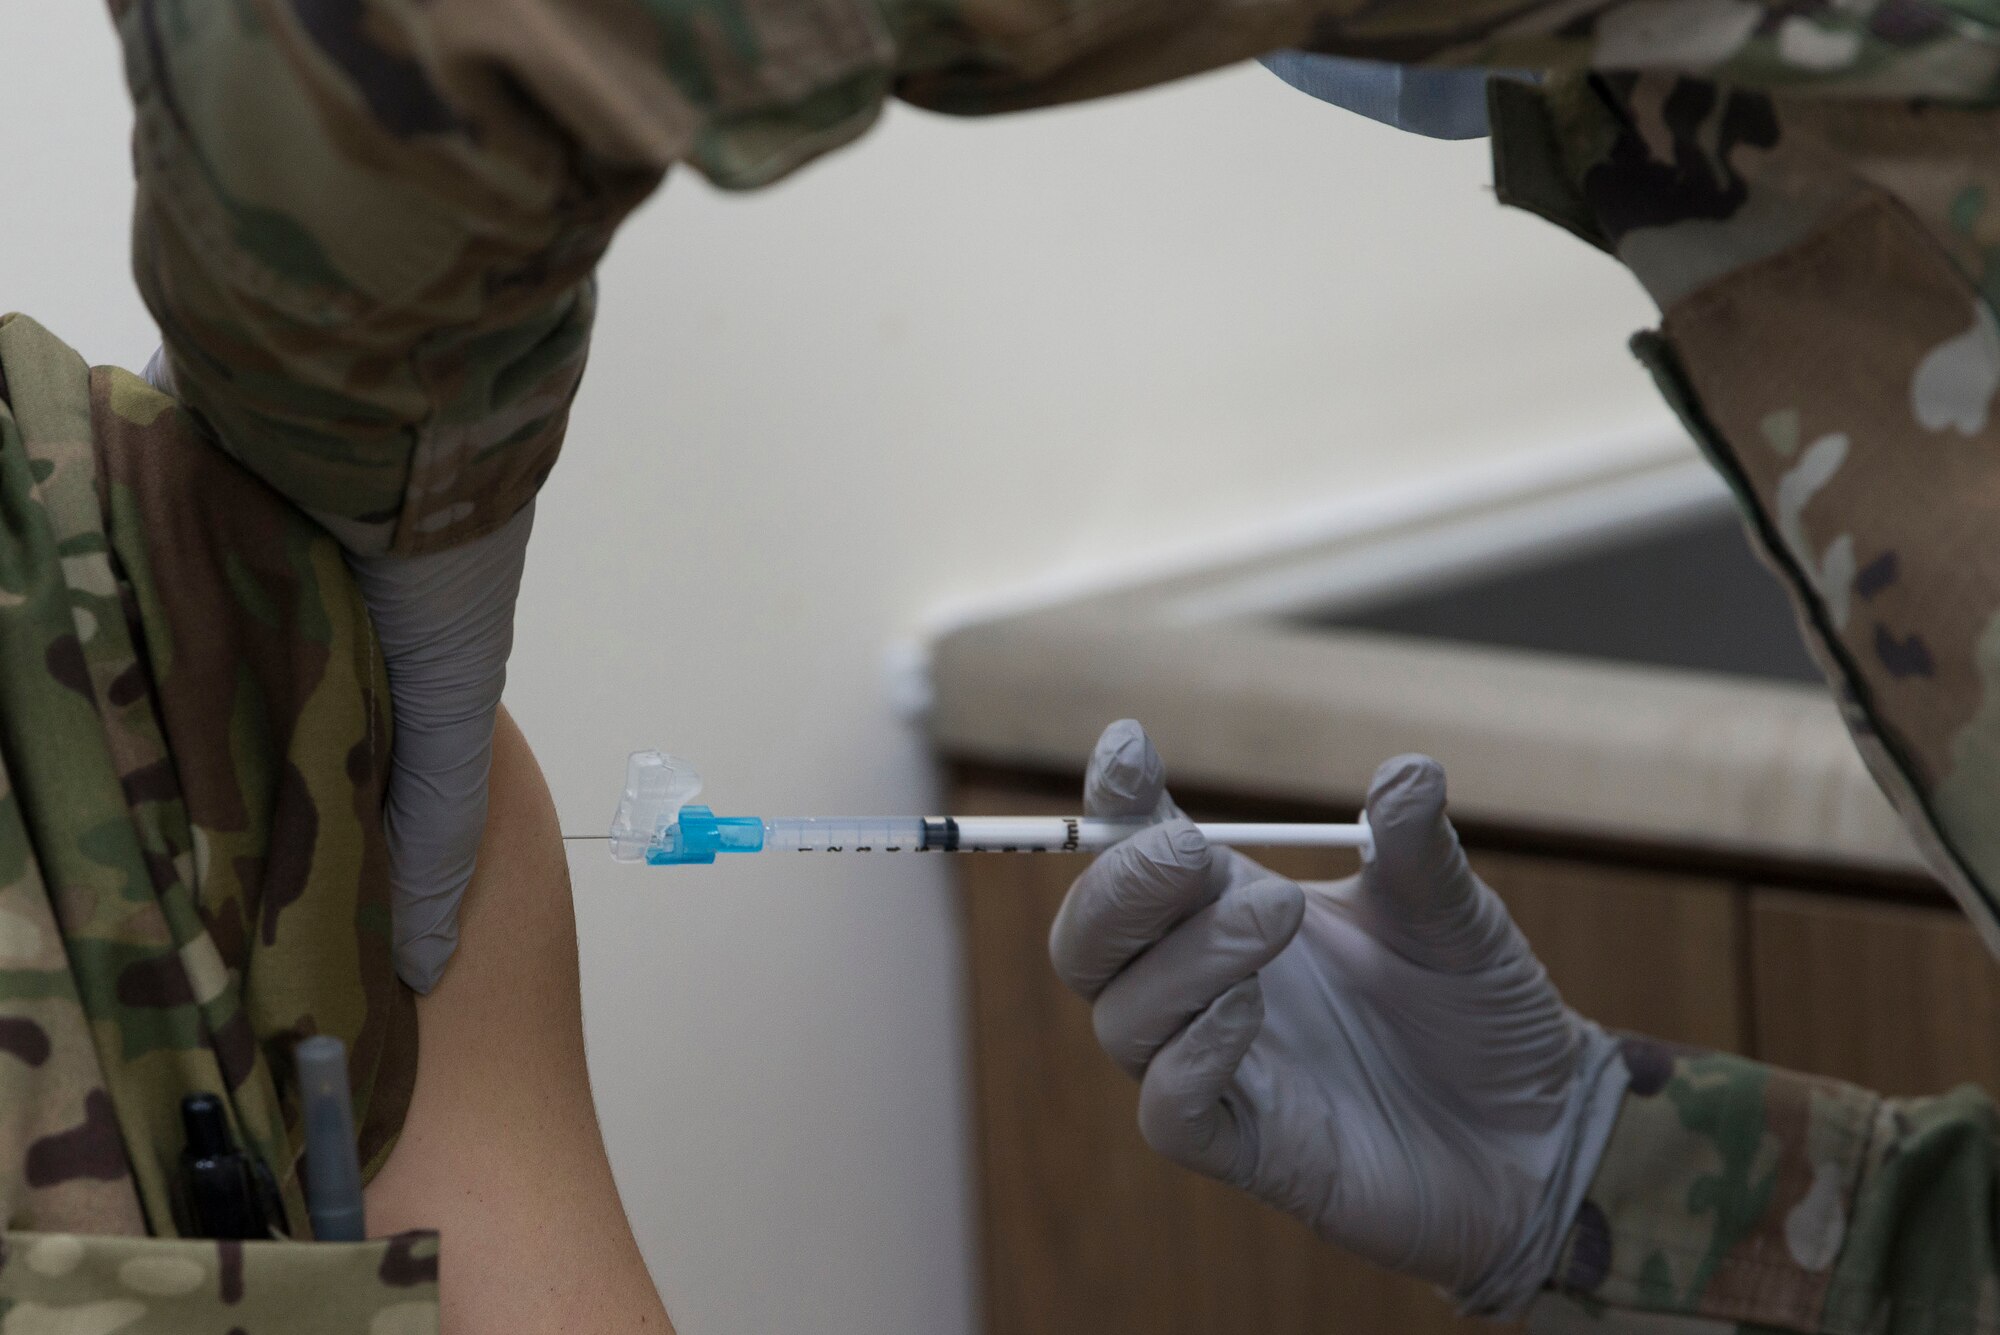 A medical technician assigned to the 380th Expeditionary Medical Group (EMDG) administers a voluntary COVID-19 vaccine to a 380th EMDG clinic staff member at Al Dhafra Air Base, United Arab Emirates, Jan. 24, 2021.